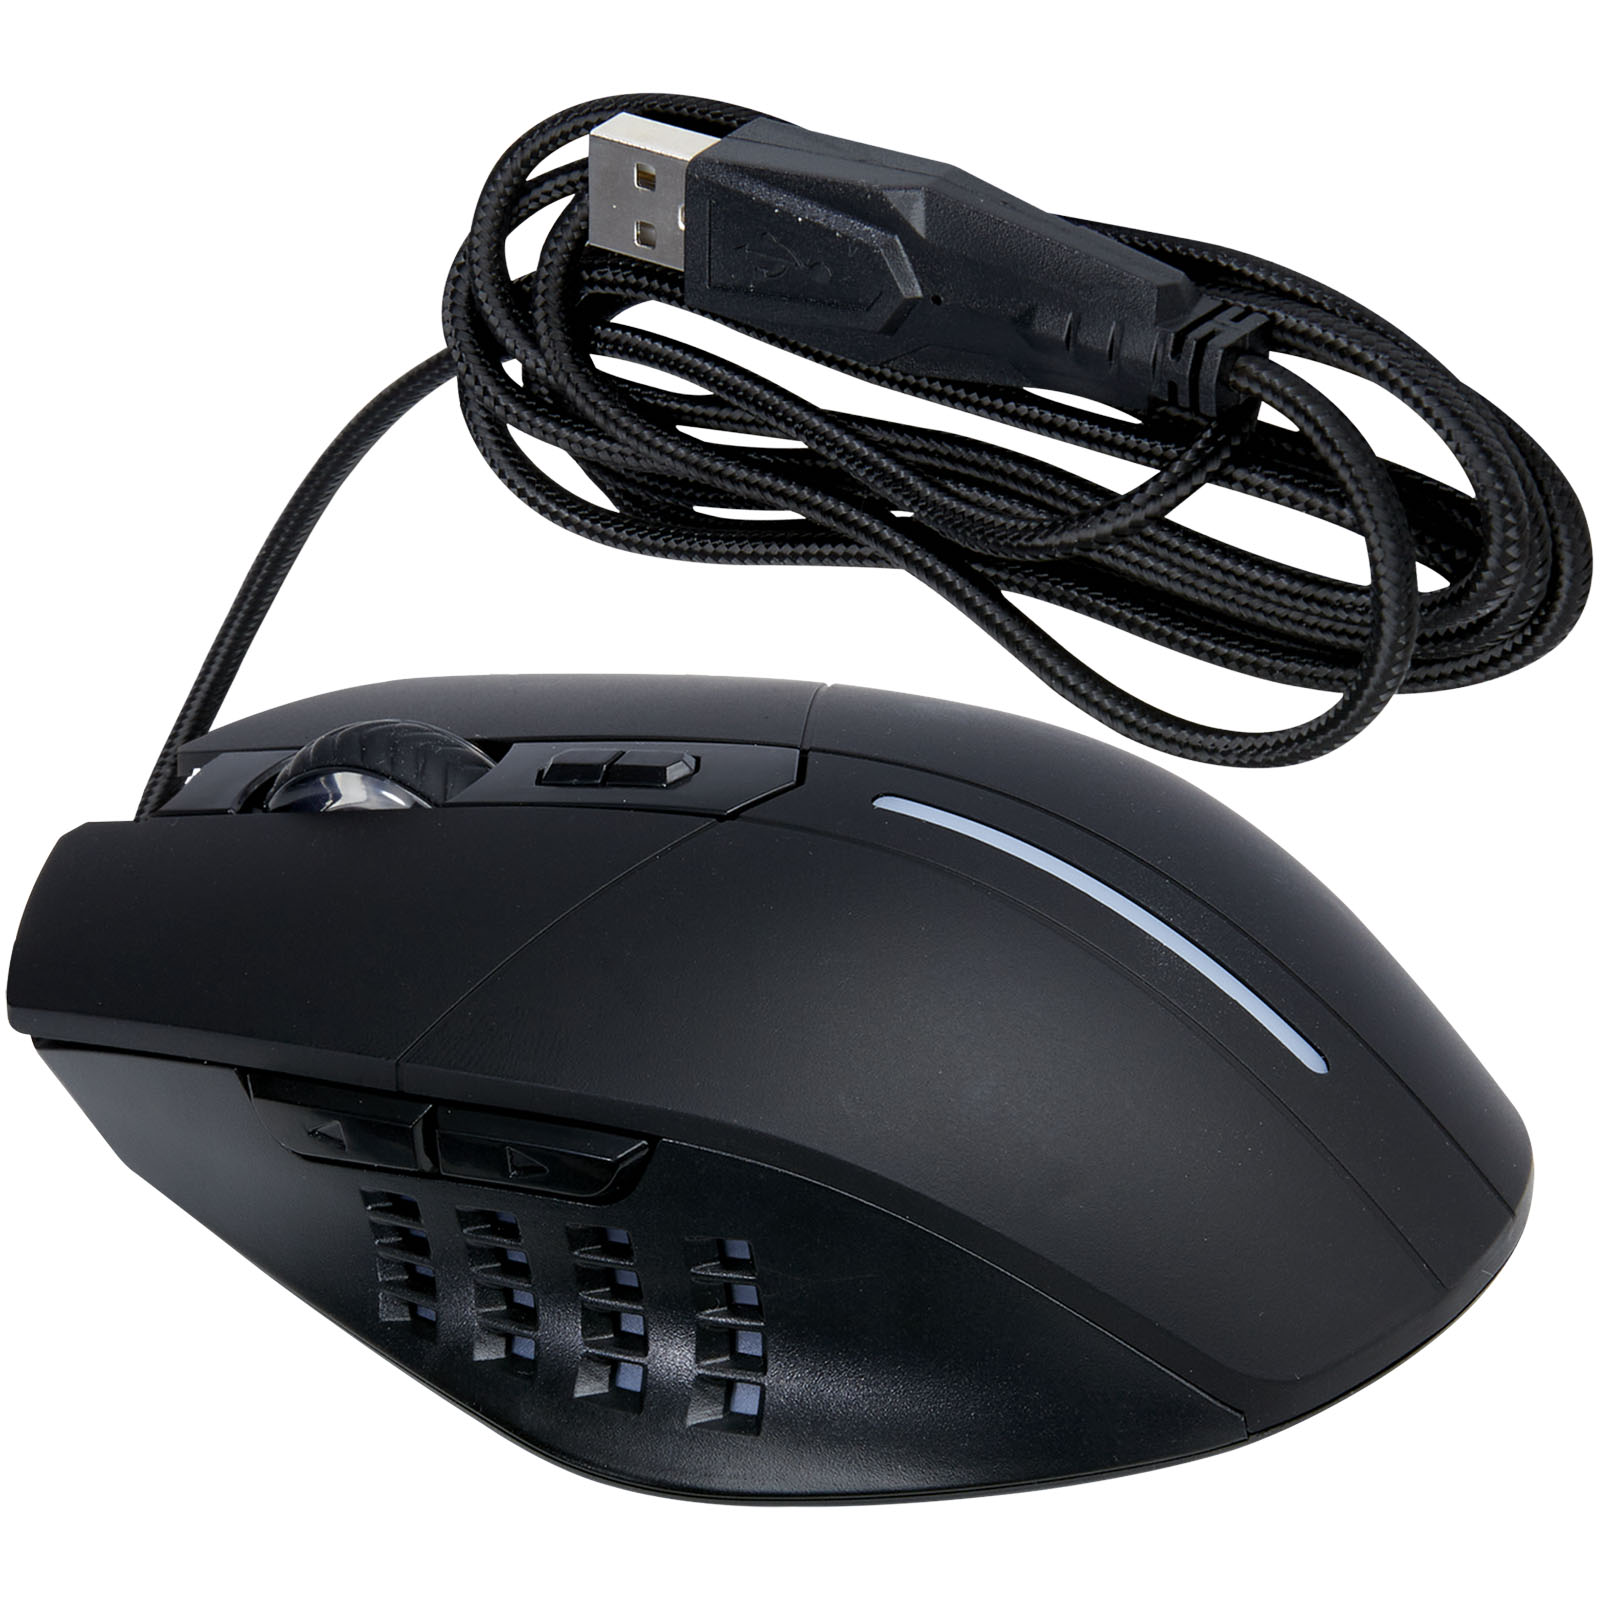 Advertising Computer Accessories - Gleam RGB gaming mouse - 0